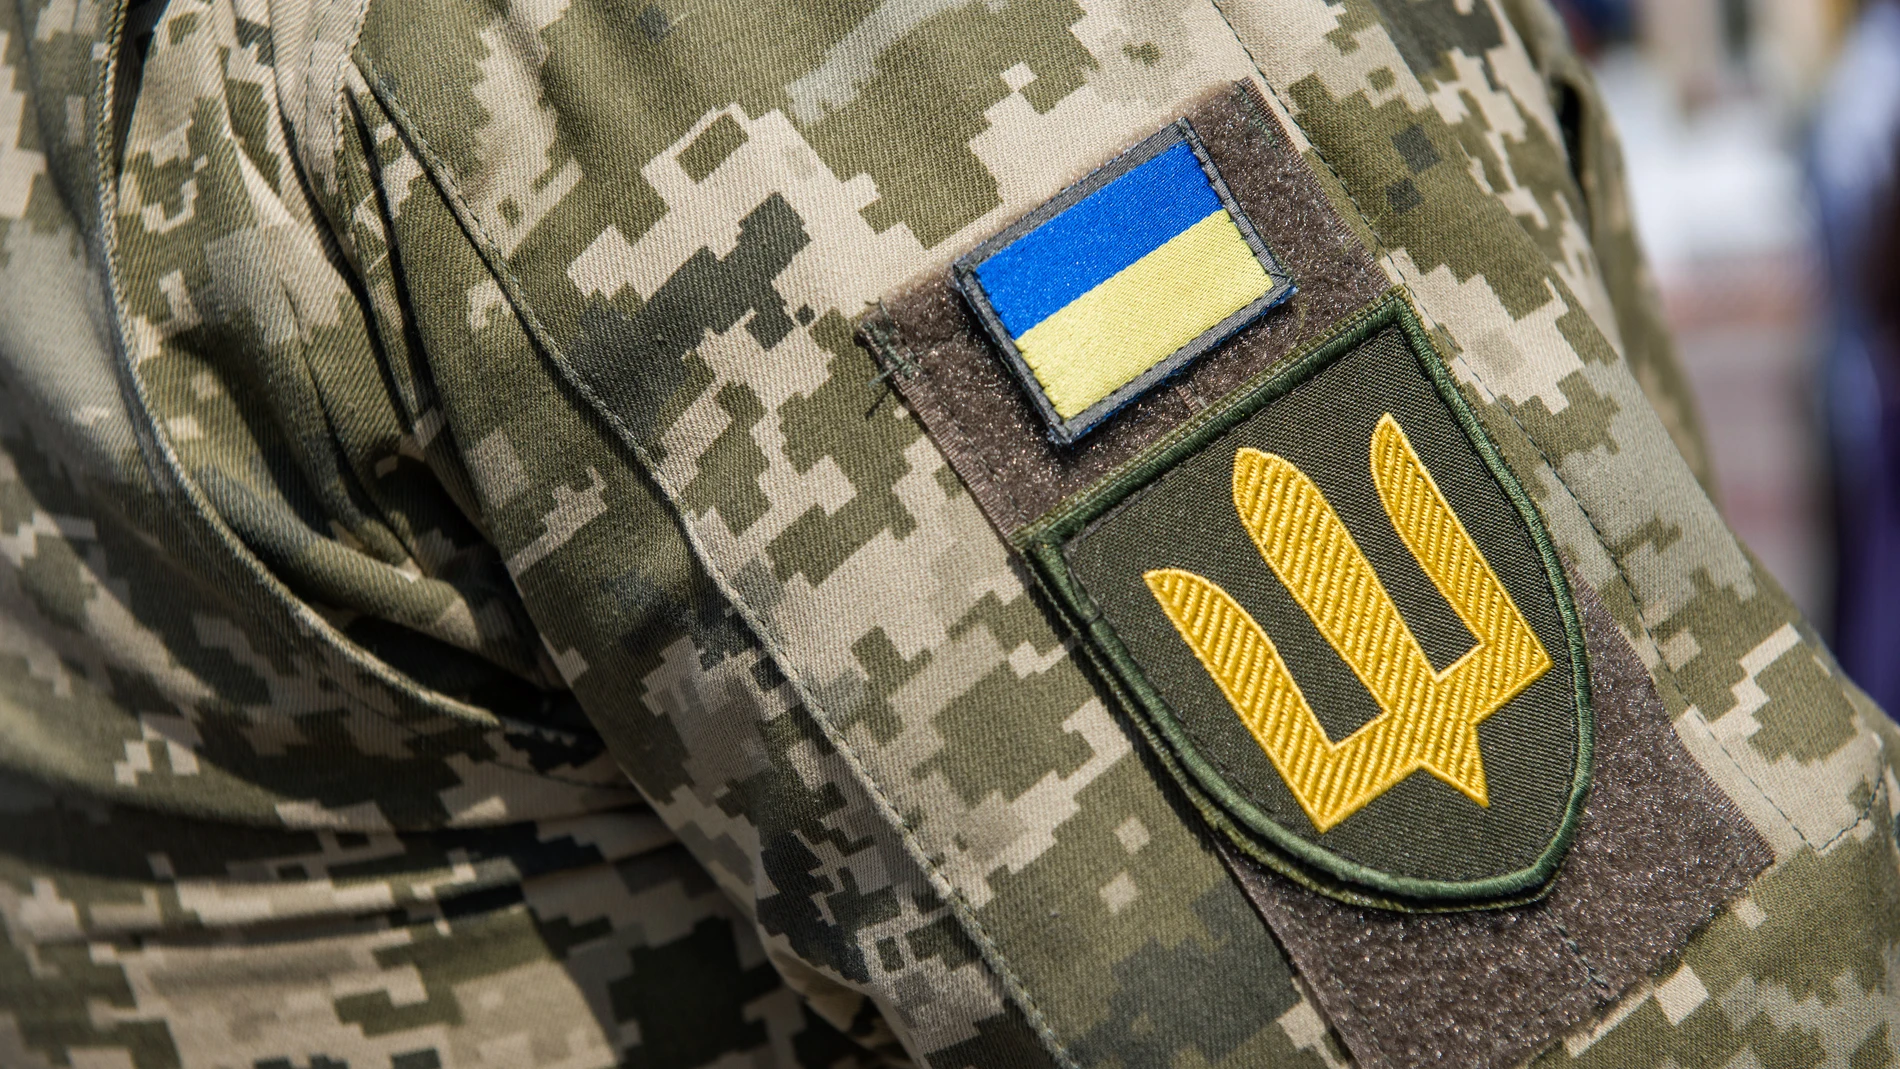 June 27, 2022, Warsaw, Mazowieckie, Poland: Ukrainian army badges are seen on the arm of a Ukrainian soldier. Polish and Ukrainian officials open an outdoor exhibition at Warsaw's Old Town of destroyed and burned out Russian tanks captured by the Ukrainians during the war. Officially named ''For our freedom and yours'' the exhibition is intended to show the horror of war and UkraineA­s heroic defense. It is to be later shown in other European capitals like Berlin or Paris. 27/06/2022